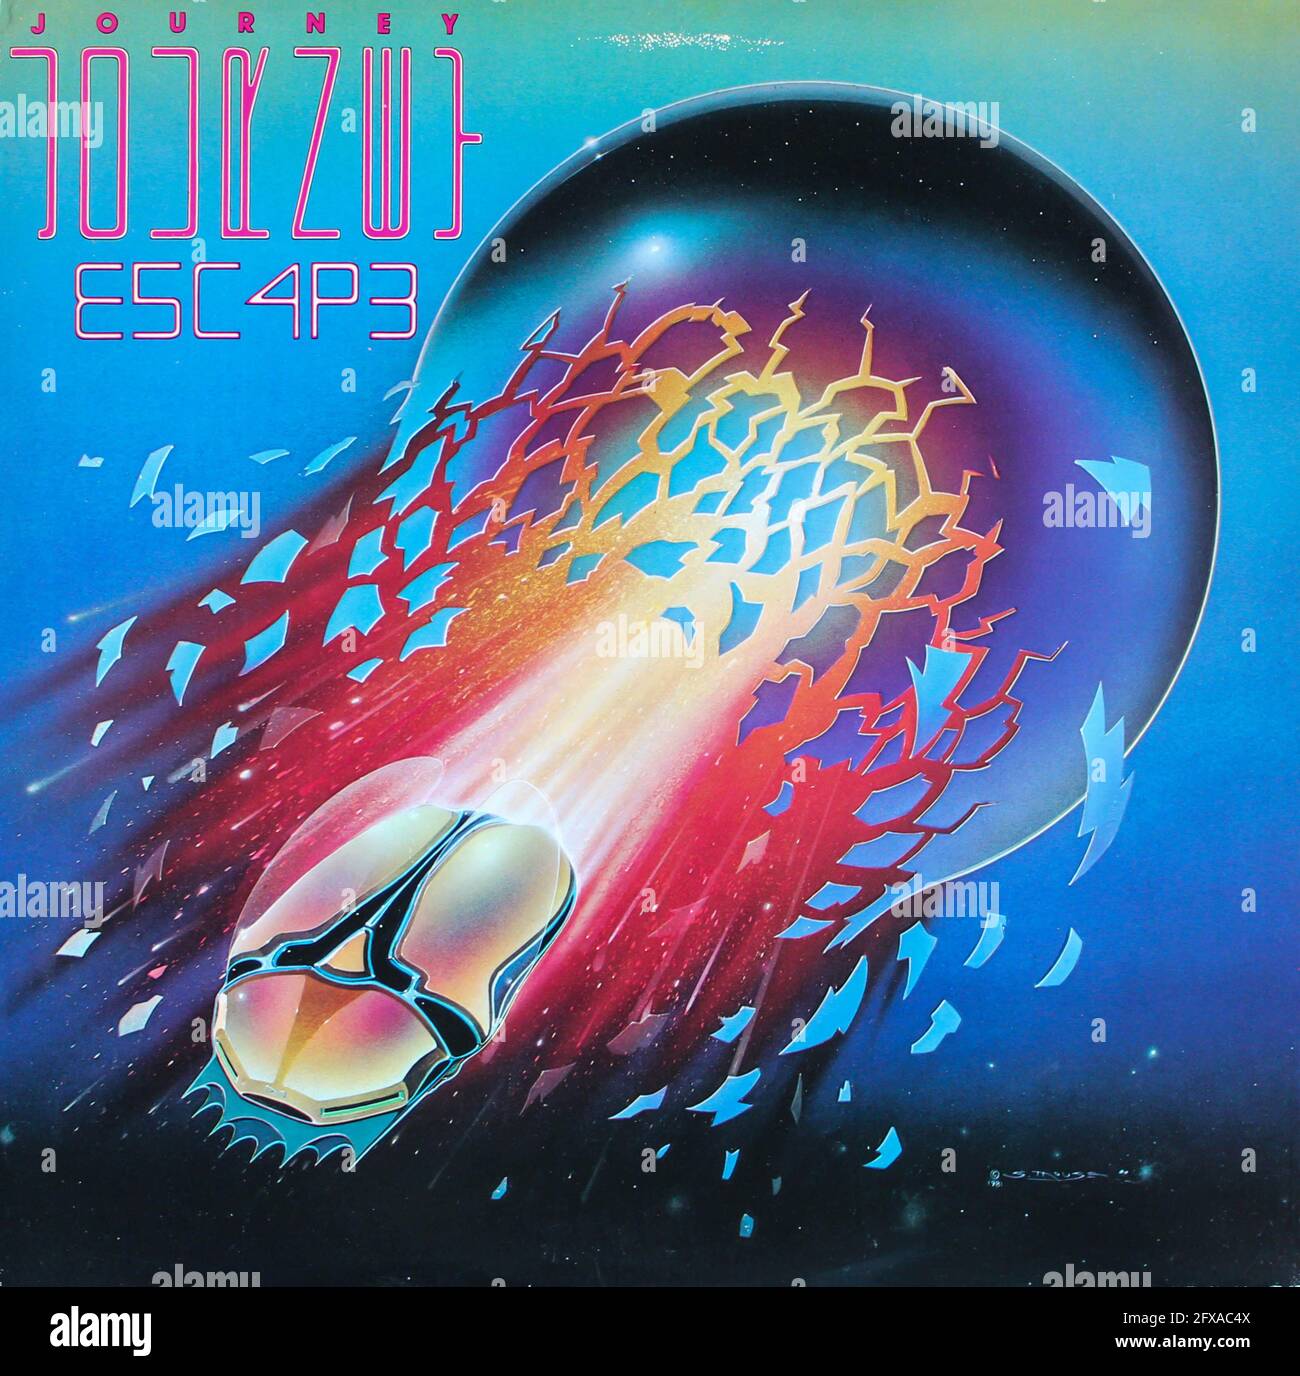 Hard rock and soft rock band, Journey band music album on vinyl record LP disc. Titled: Escape album cover Stock Photo